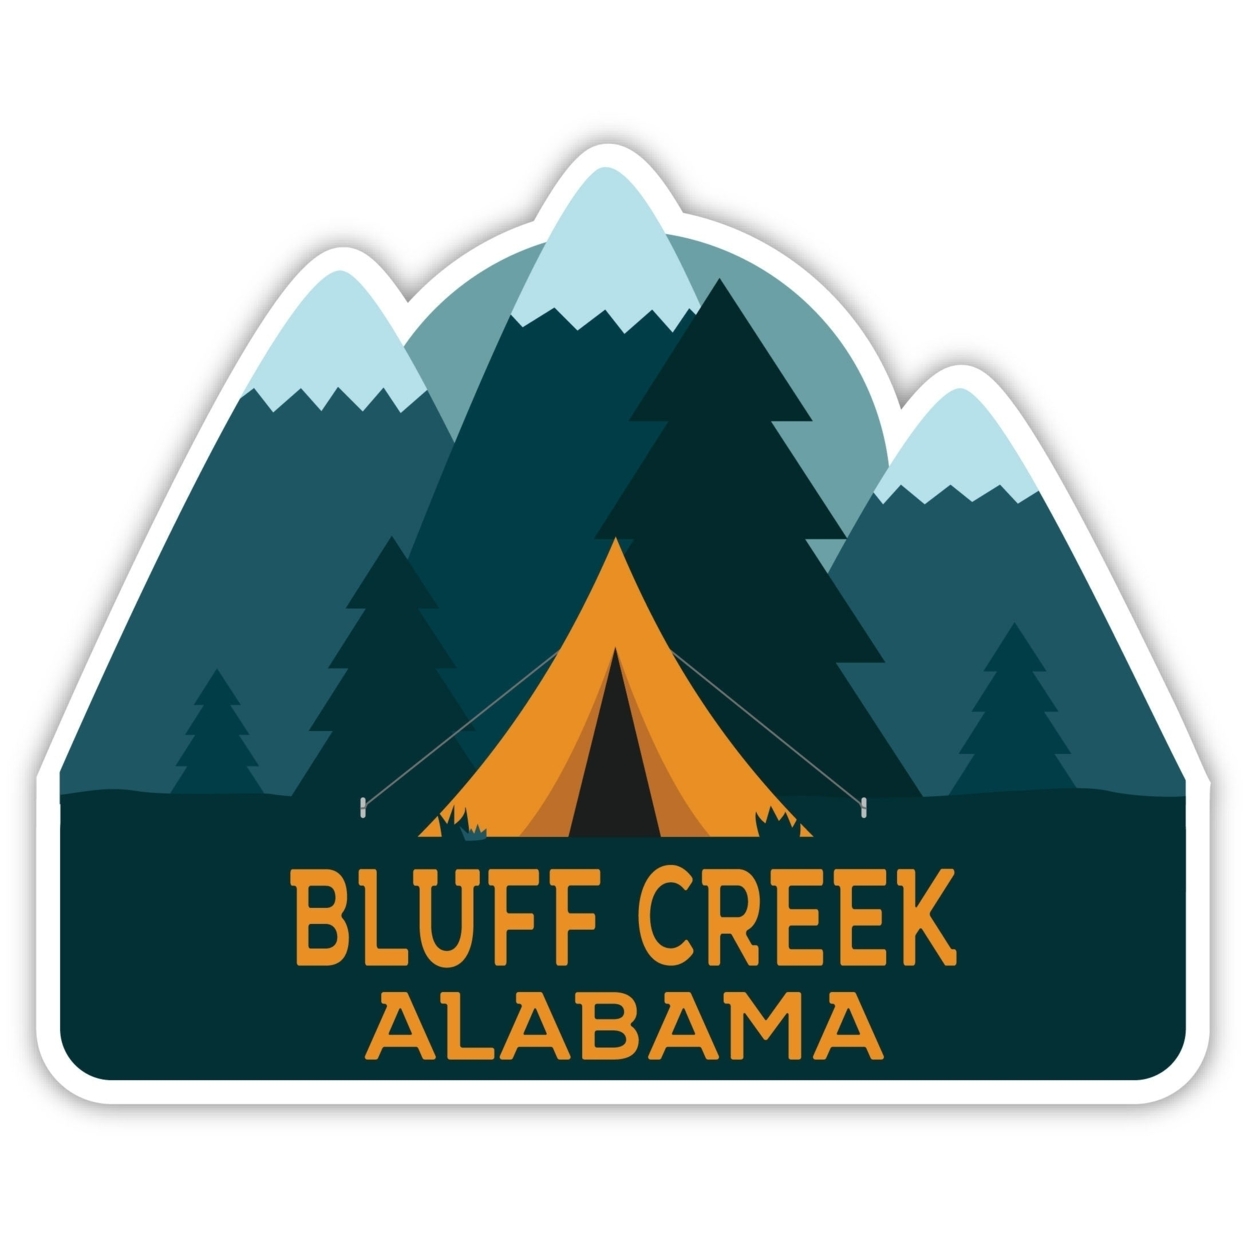 Bluff Creek Alabama Souvenir Decorative Stickers (Choose Theme And Size) - 4-Pack, 12-Inch, Tent